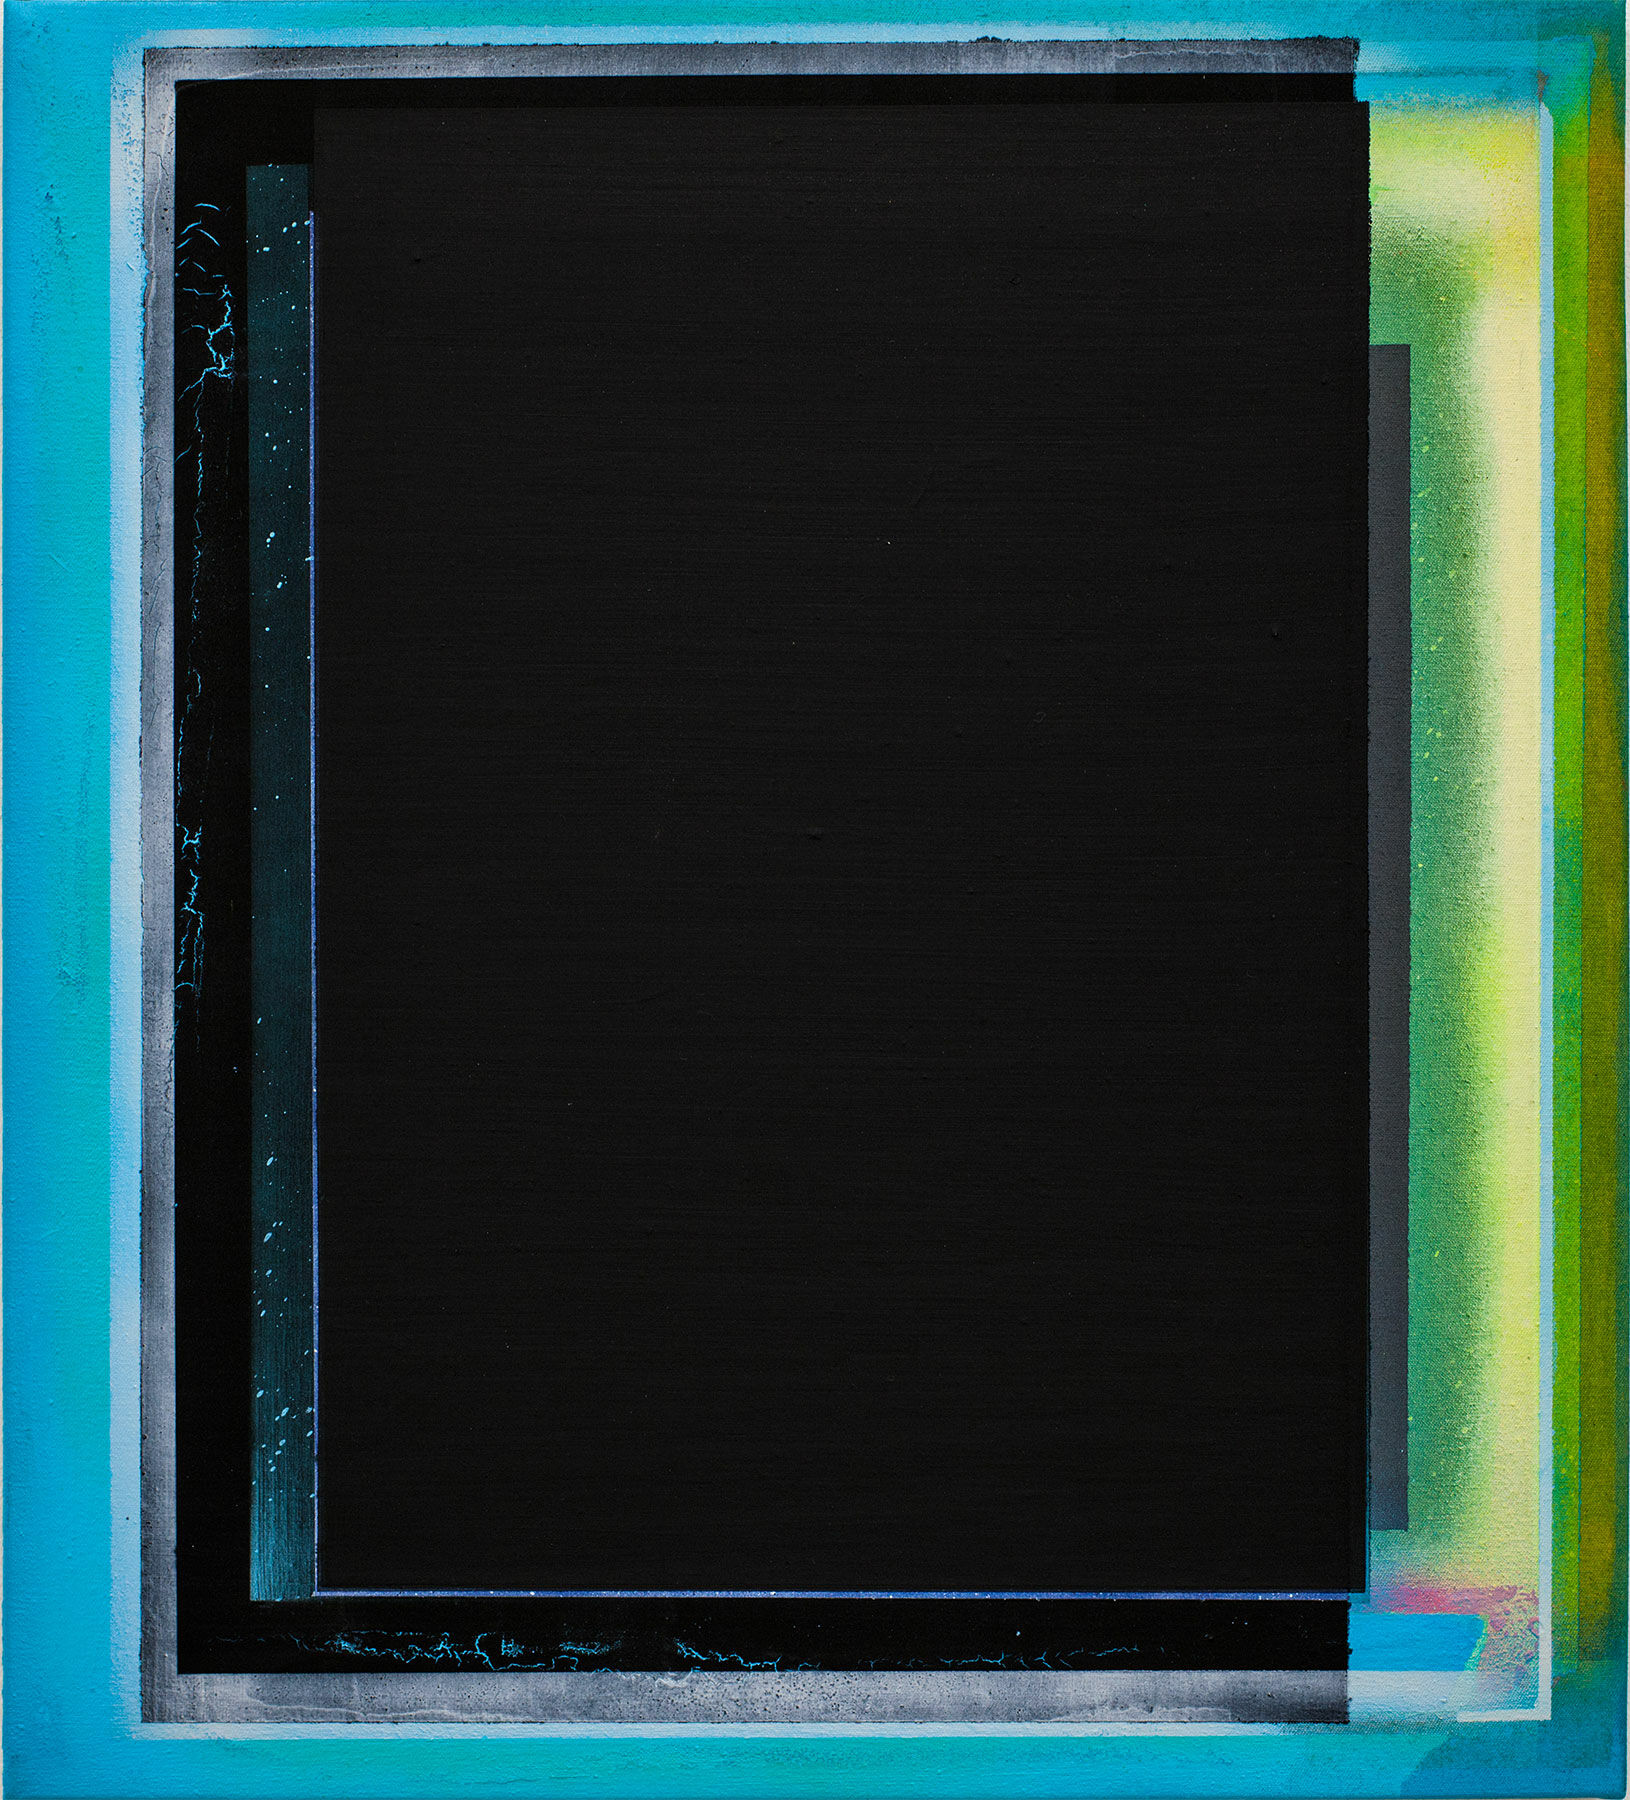 Picture "Untitled, (WV 20, Lw 39)" (2020) (Original / Unique piece), on stretcher frame by Gerhard Langenfeld